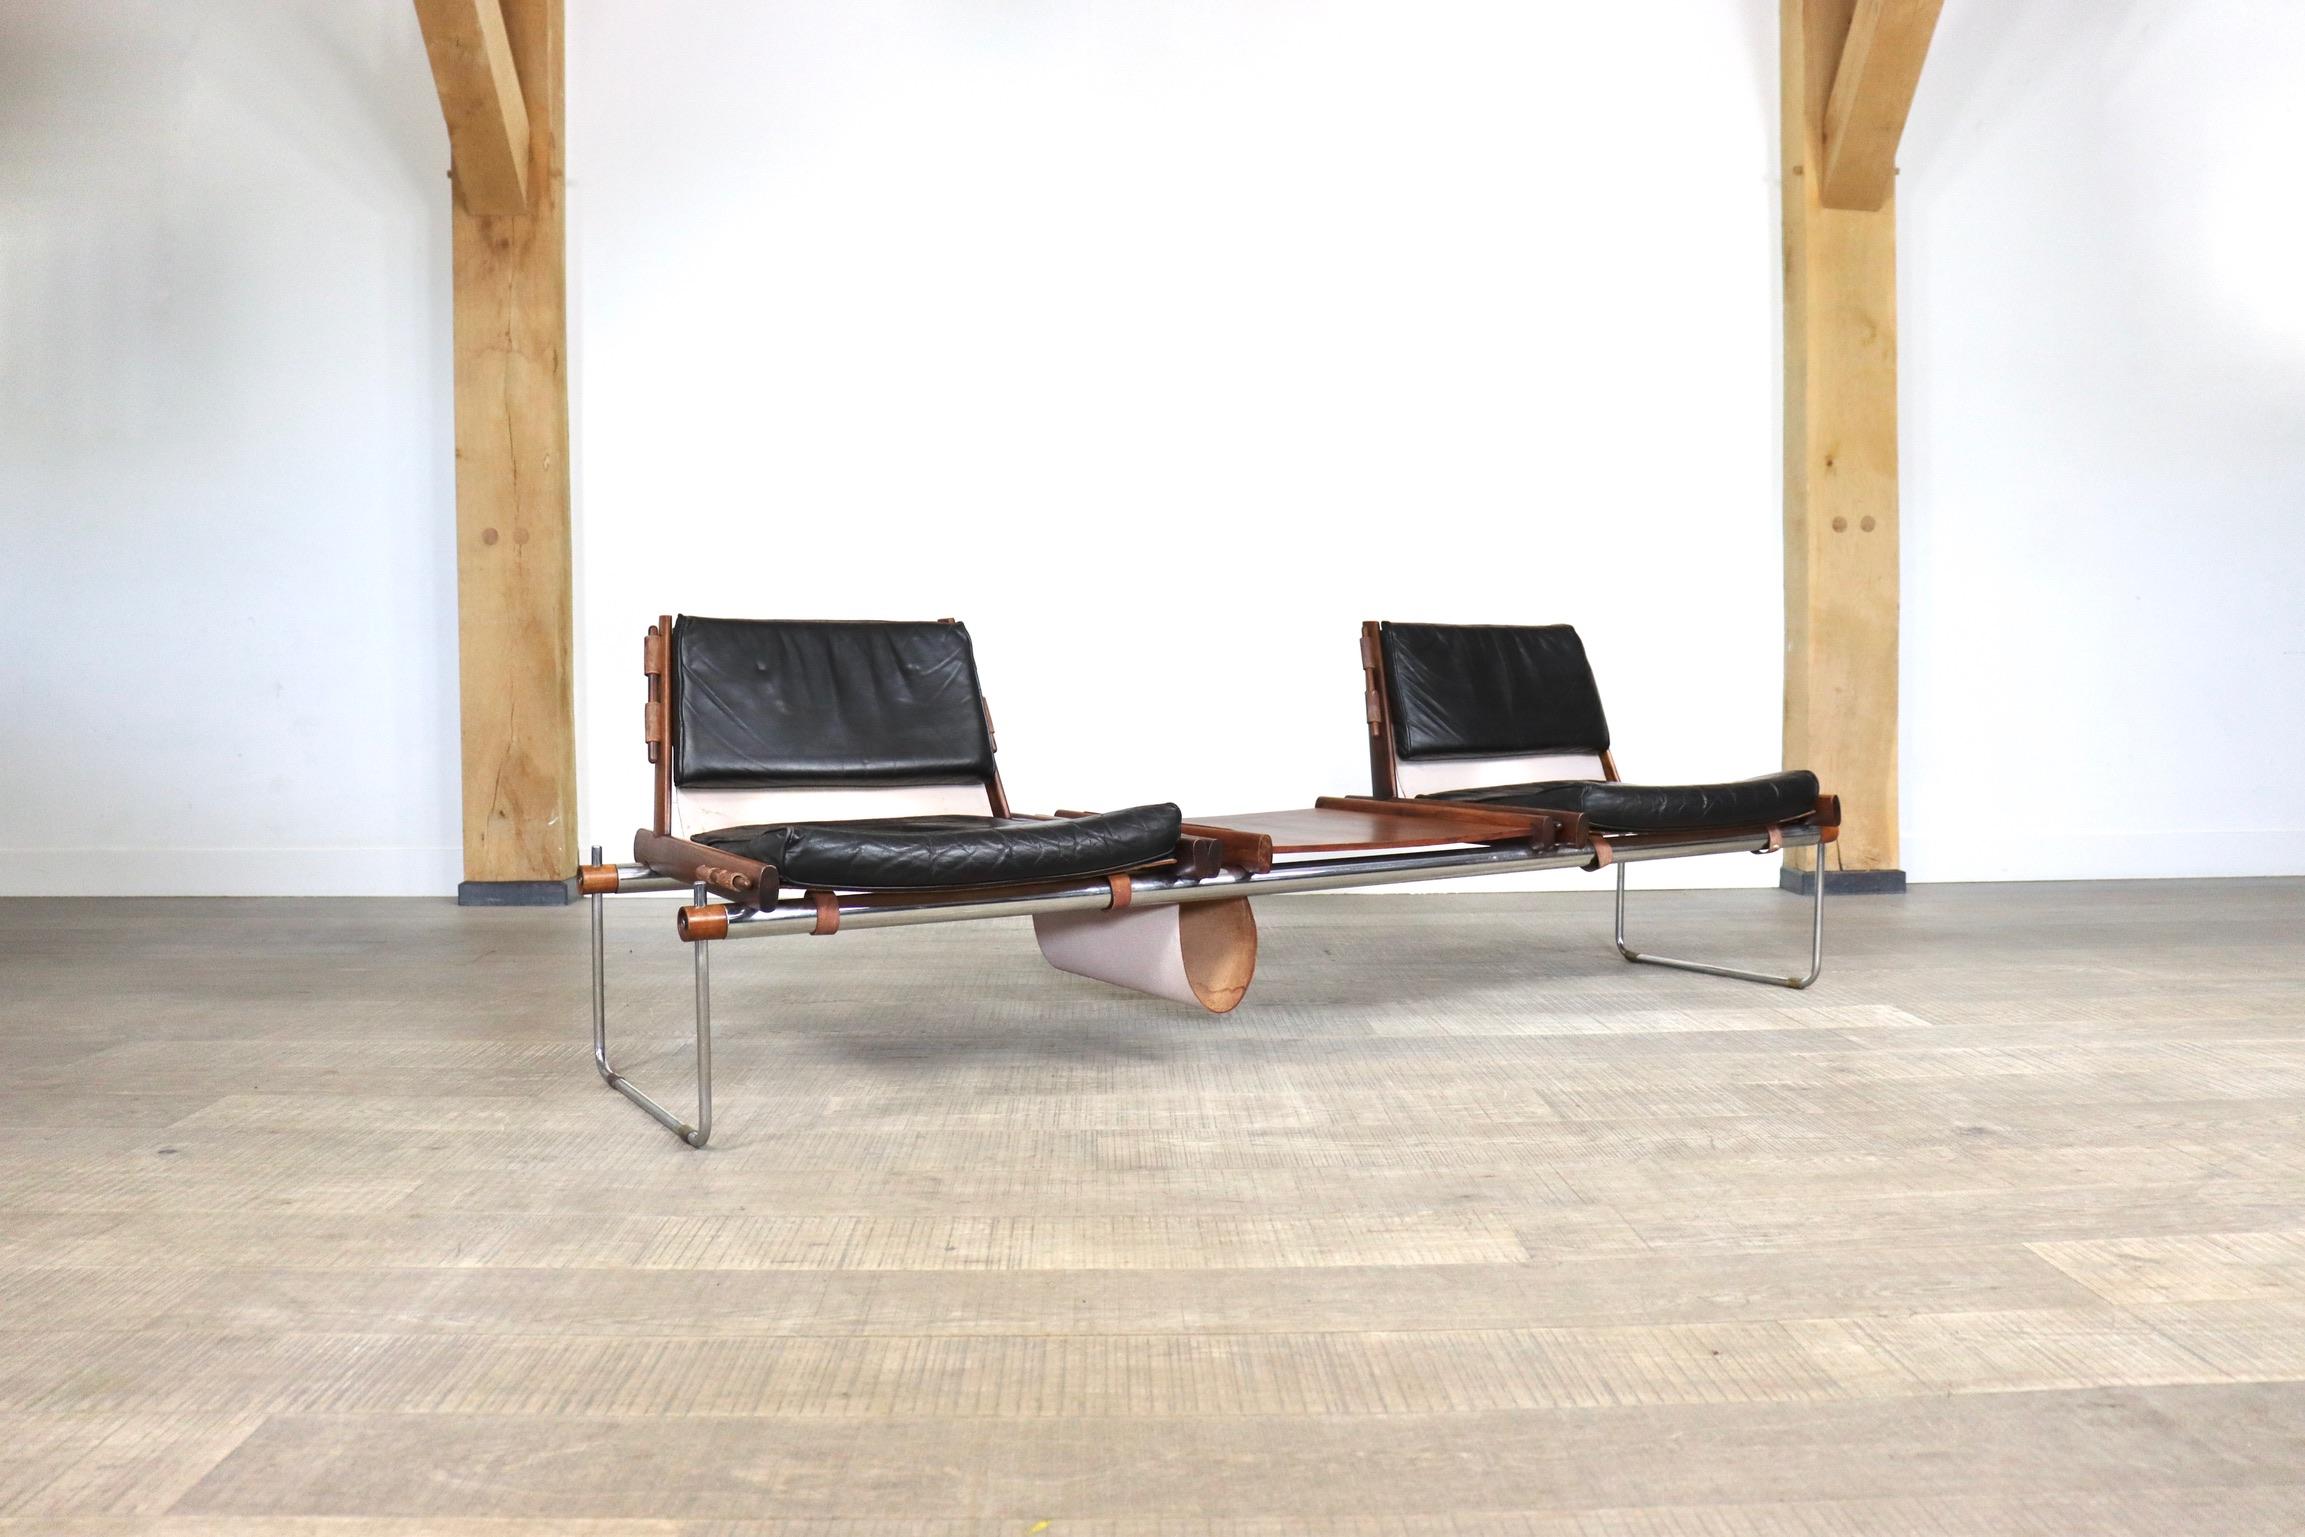 Incredibly rare Percival Lafer MP-123 bench by Lafer MP in stunning black leather and Brazilian Rosewood, 1960s. This model is one of Percival Lafer's most desirable pieces. 
The modular seating, rosewood sidetable and magazine rack in thick cognac